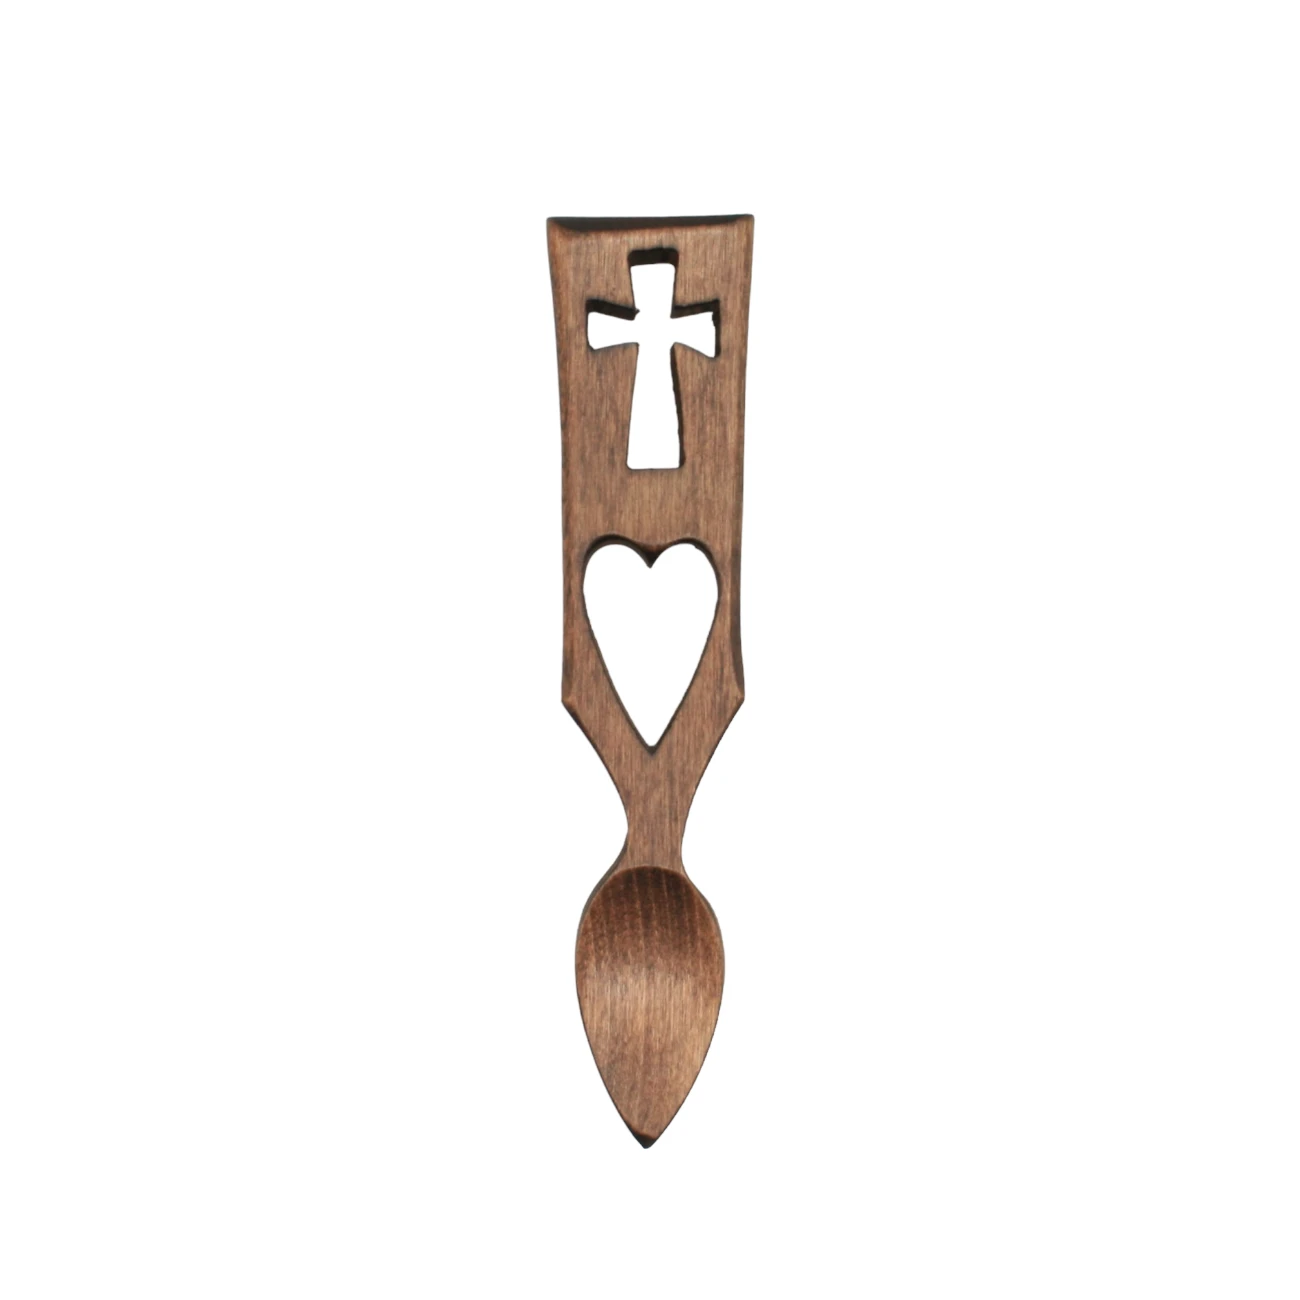 An image of a lovespoon titled Heart & Cross Cutout